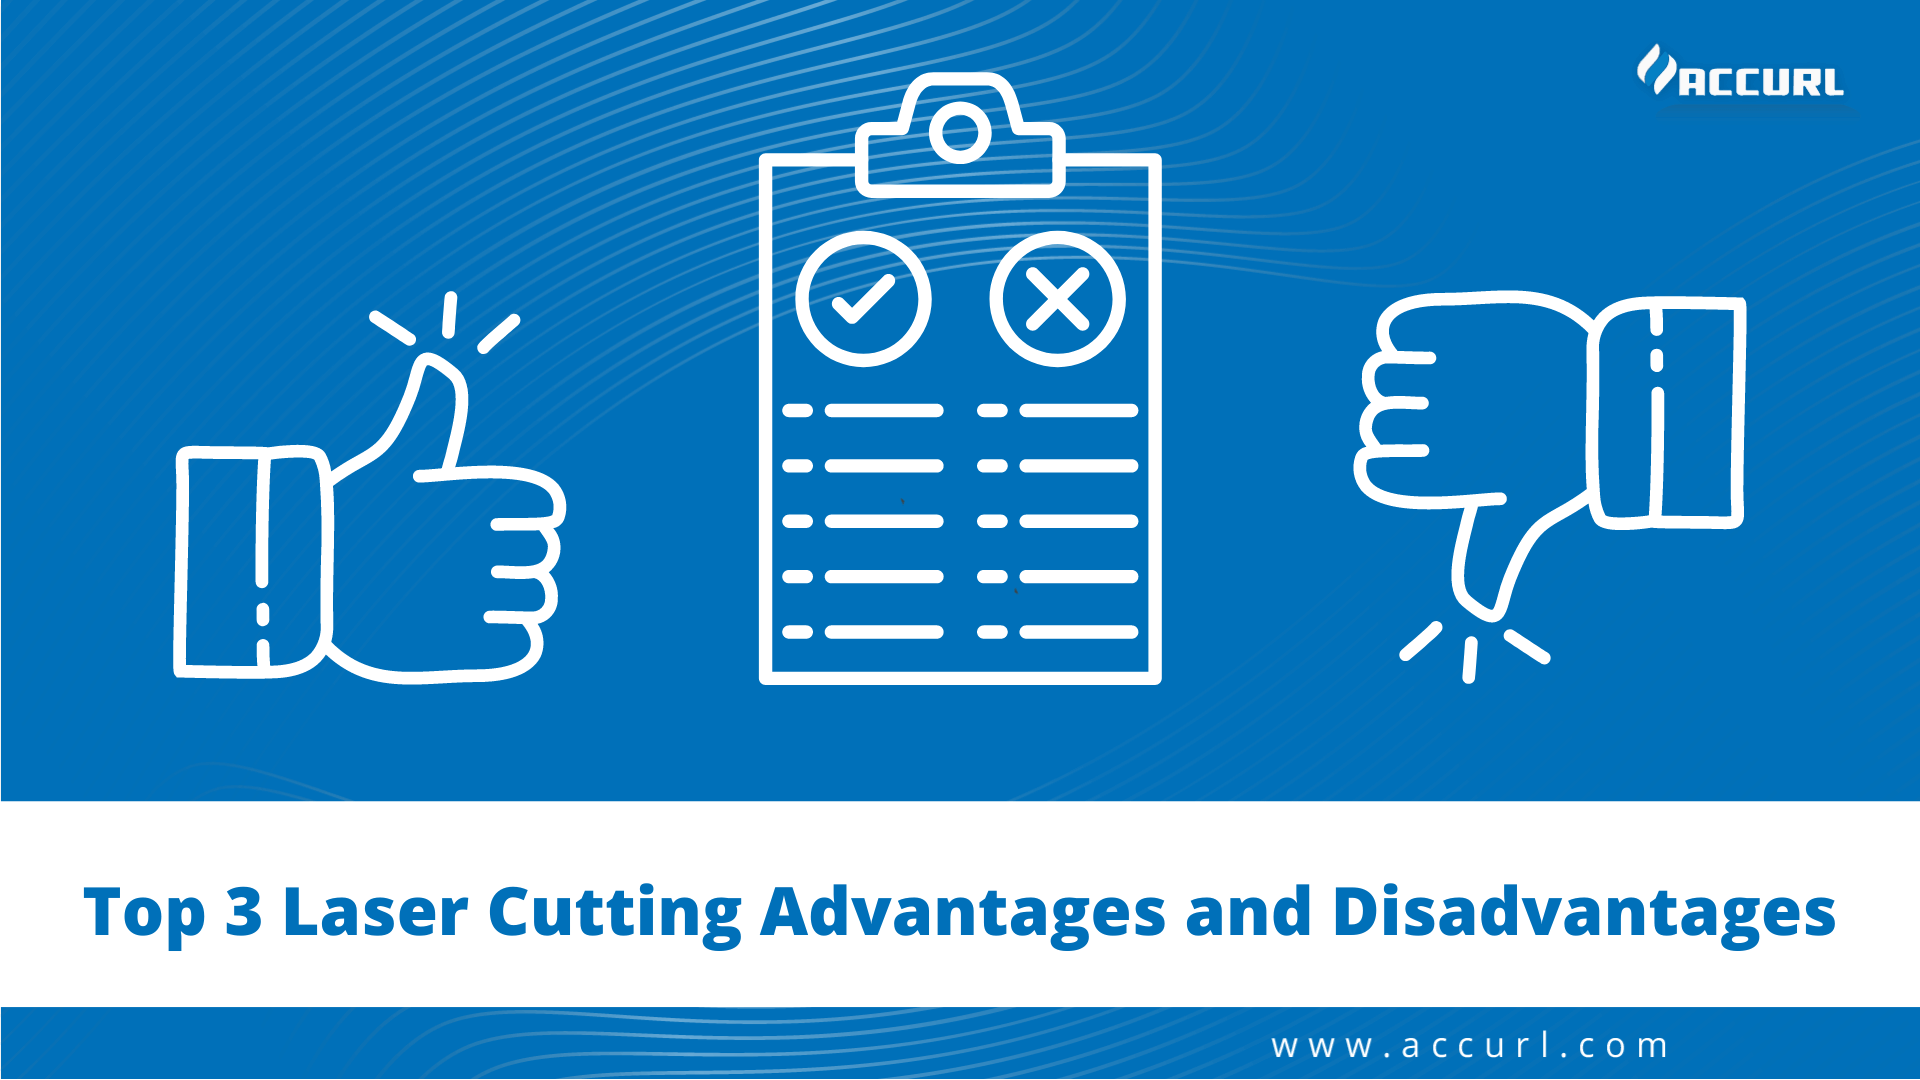 Top 3 Laser Cutting Advantages and Disadvantages